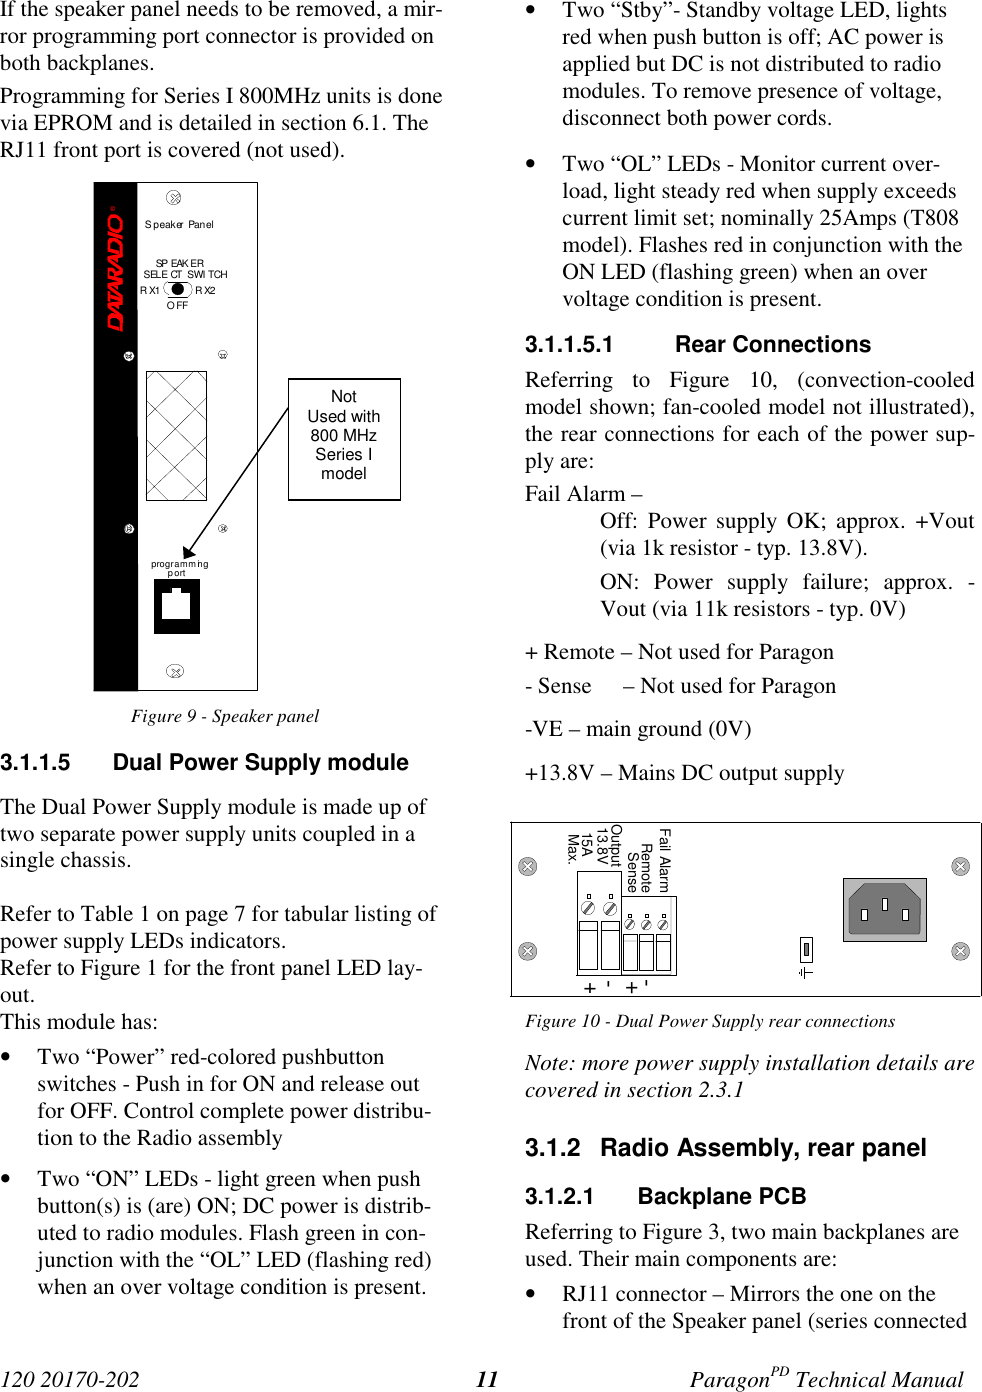 120 20170-202 ParagonPD Technical Manual11If the speaker panel needs to be removed, a mir-ror programming port connector is provided onboth backplanes.Programming for Series I 800MHz units is donevia EPROM and is detailed in section 6.1. TheRJ11 front port is covered (not used).Figure 9 - Speaker panel3.1.1.5  Dual Power Supply moduleThe Dual Power Supply module is made up oftwo separate power supply units coupled in asingle chassis.Refer to Table 1 on page 7 for tabular listing ofpower supply LEDs indicators.Refer to Figure 1 for the front panel LED lay-out.This module has:• Two “Power” red-colored pushbuttonswitches - Push in for ON and release outfor OFF. Control complete power distribu-tion to the Radio assembly• Two “ON” LEDs - light green when pushbutton(s) is (are) ON; DC power is distrib-uted to radio modules. Flash green in con-junction with the “OL” LED (flashing red)when an over voltage condition is present.• Two “Stby”- Standby voltage LED, lightsred when push button is off; AC power isapplied but DC is not distributed to radiomodules. To remove presence of voltage,disconnect both power cords.• Two “OL” LEDs - Monitor current over-load, light steady red when supply exceedscurrent limit set; nominally 25Amps (T808model). Flashes red in conjunction with theON LED (flashing green) when an overvoltage condition is present.3.1.1.5.1 Rear ConnectionsReferring to Figure 10, (convection-cooledmodel shown; fan-cooled model not illustrated),the rear connections for each of the power sup-ply are:Fail Alarm –Off: Power supply OK; approx. +Vout(via 1k resistor - typ. 13.8V).ON: Power supply failure; approx. -Vout (via 11k resistors - typ. 0V)+ Remote – Not used for Paragon- Sense     – Not used for Paragon-VE – main ground (0V)+13.8V – Mains DC output supplyFigure 10 - Dual Power Supply rear connectionsNote: more power supply installation details arecovered in section 2.3.13.1.2  Radio Assembly, rear panel3.1.2.1 Backplane PCBReferring to Figure 3, two main backplanes areused. Their main components are:• RJ11 connector – Mirrors the one on thefront of the Speaker panel (series connected®S peaker  Panelprogramm ingportRX2RX1OFFSP EAK ERSELE CT  SWI TCHNotUsed with800 MHzSeries Imodel15A+-OutputSense+-RemoteFail Alarm13.8VMax.